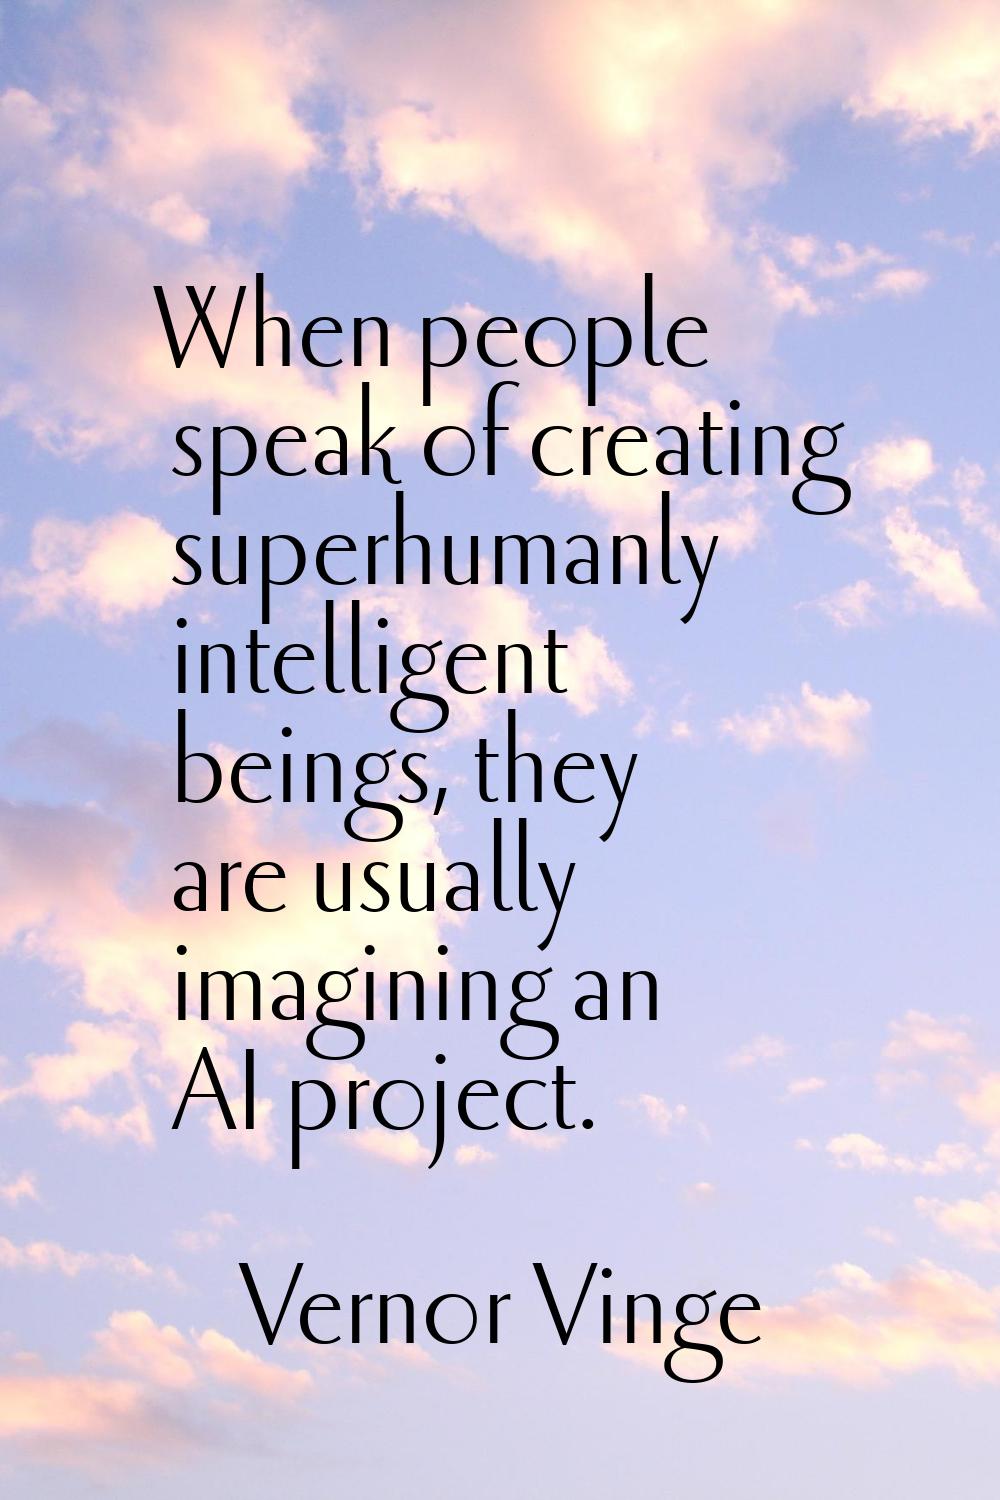 When people speak of creating superhumanly intelligent beings, they are usually imagining an AI pro